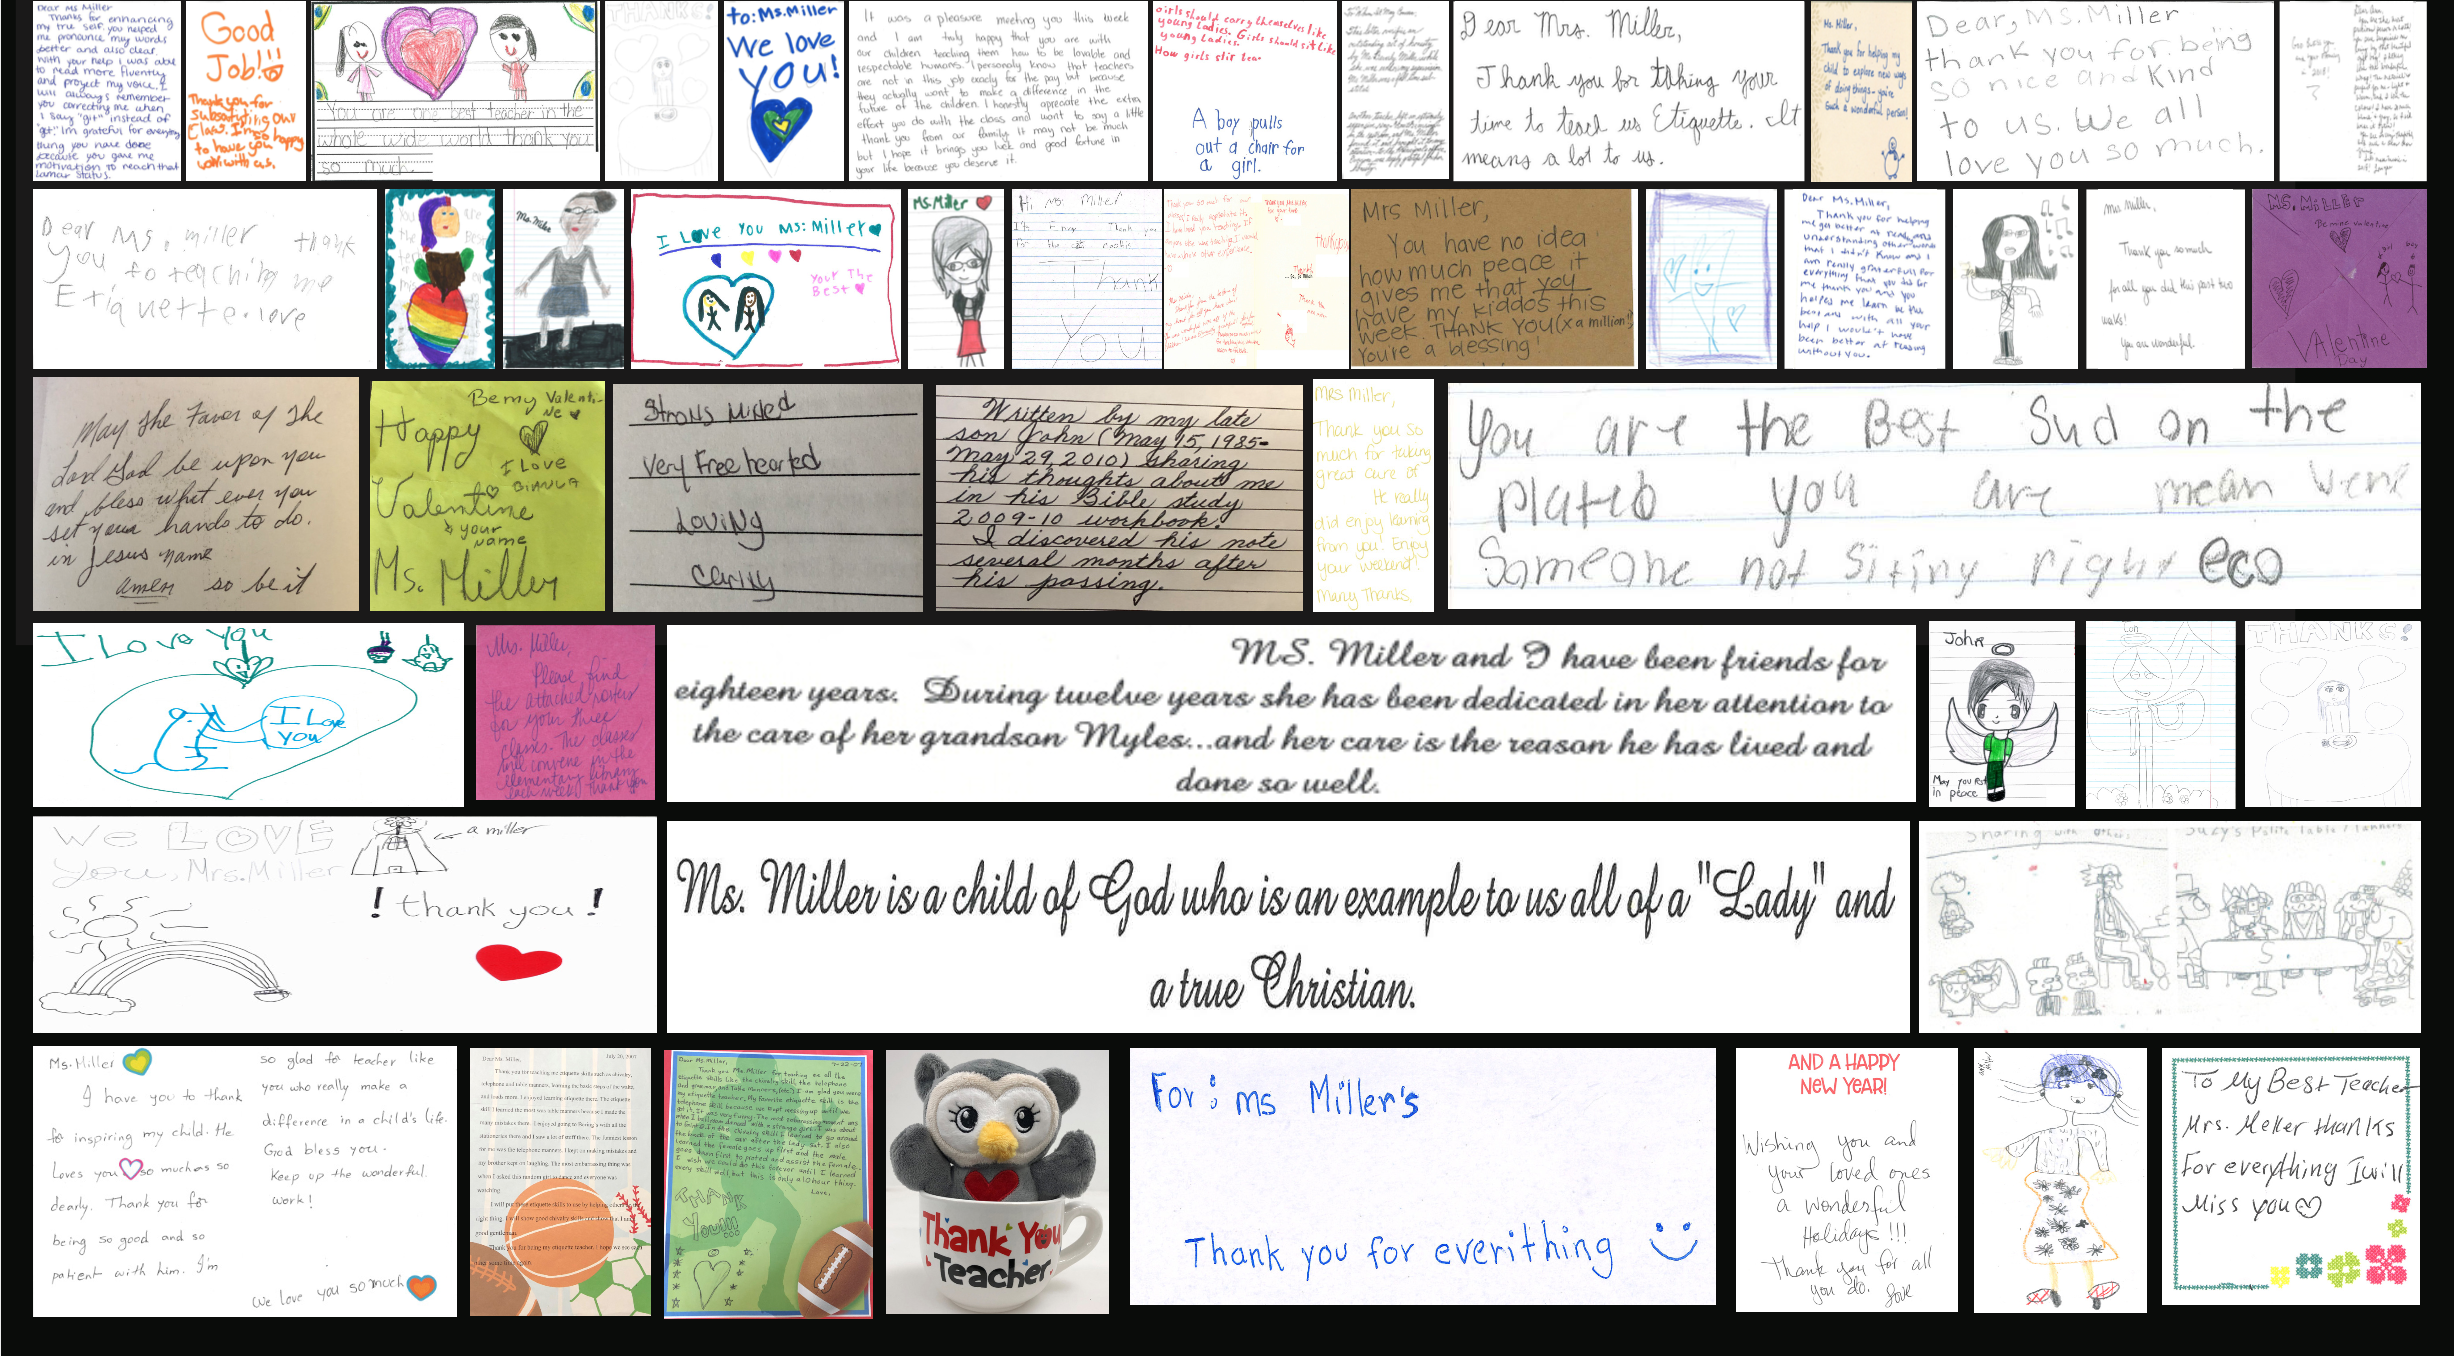 Thank you message collage from the students of Ann Miller Etiquette